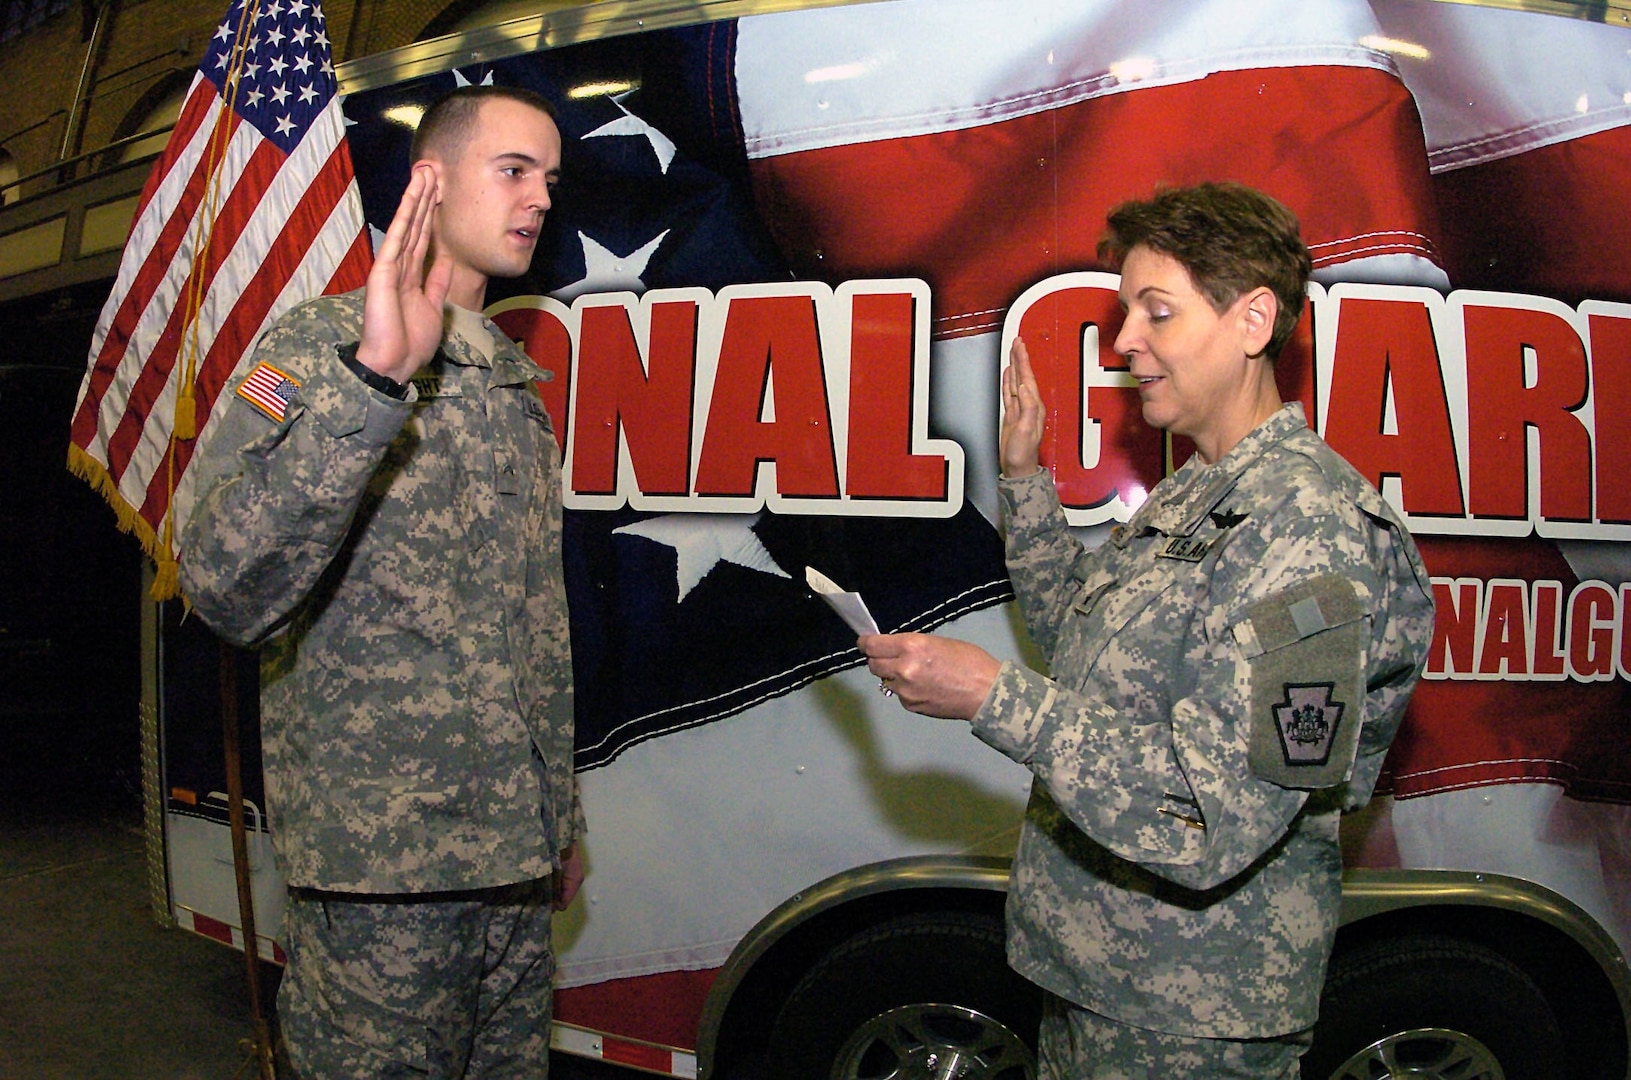 Army Maj. Gen. Jessica Wright, the adjutant general of the Pennsylvania National Guard, recently swore her son Mike Wright into her ranks. Mike Wright, a Reserve Officer Training Corps cadet at King's College, was sworn into the Pennsylvania Army National Guard at a ceremony held at the Kingston Armory in Wilkes-Barre, Pa.